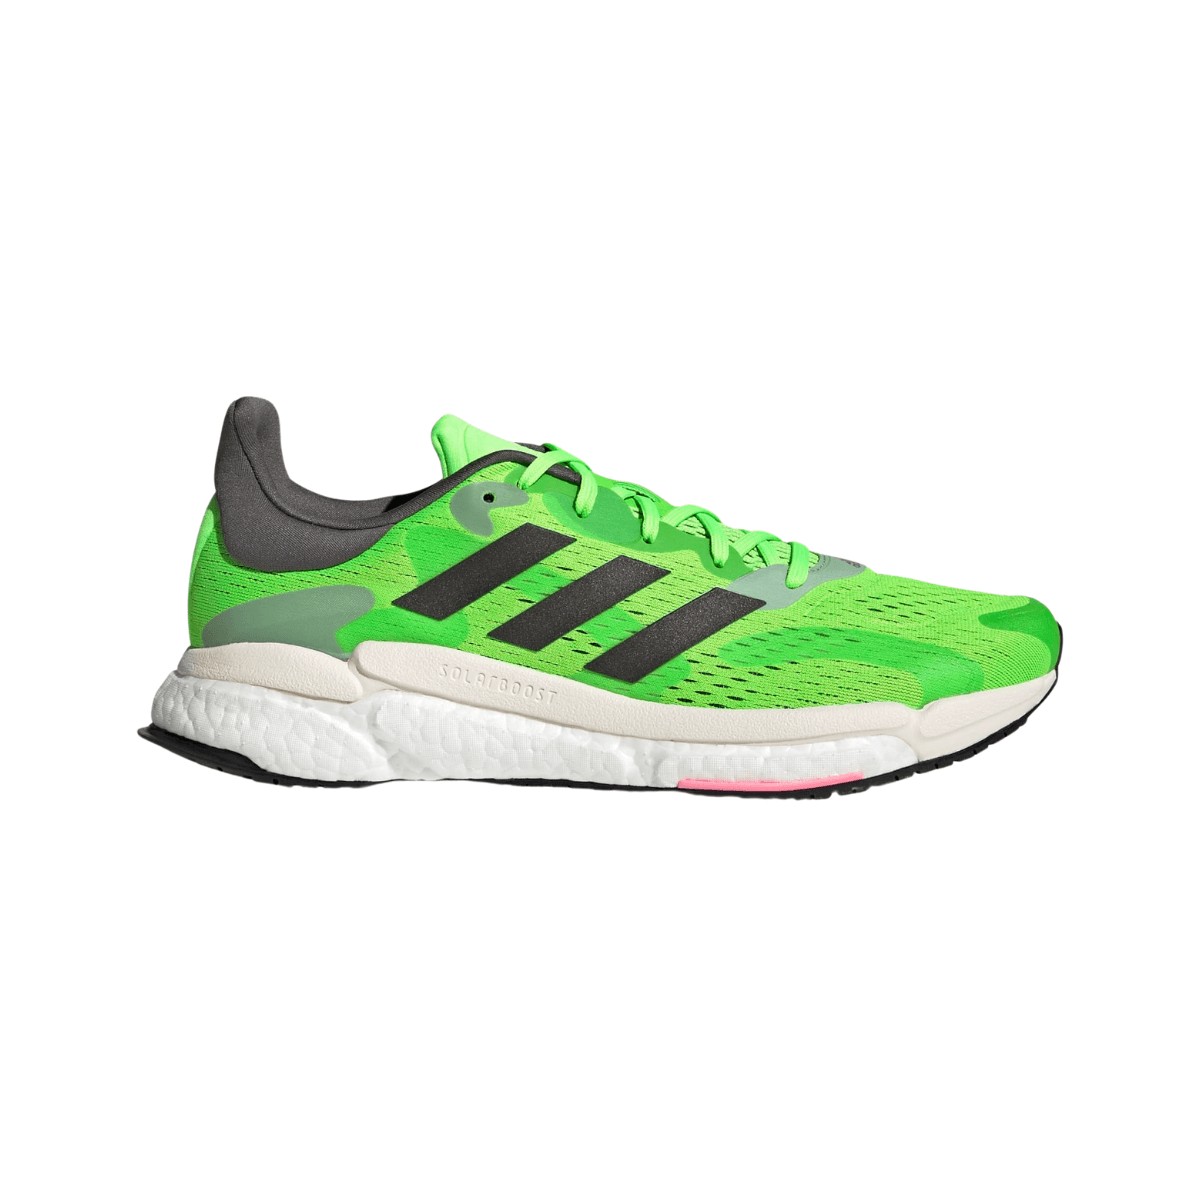 Chaussures Adidas Solar Boost 4 Vert Gris AW22, Taille UK 11.5